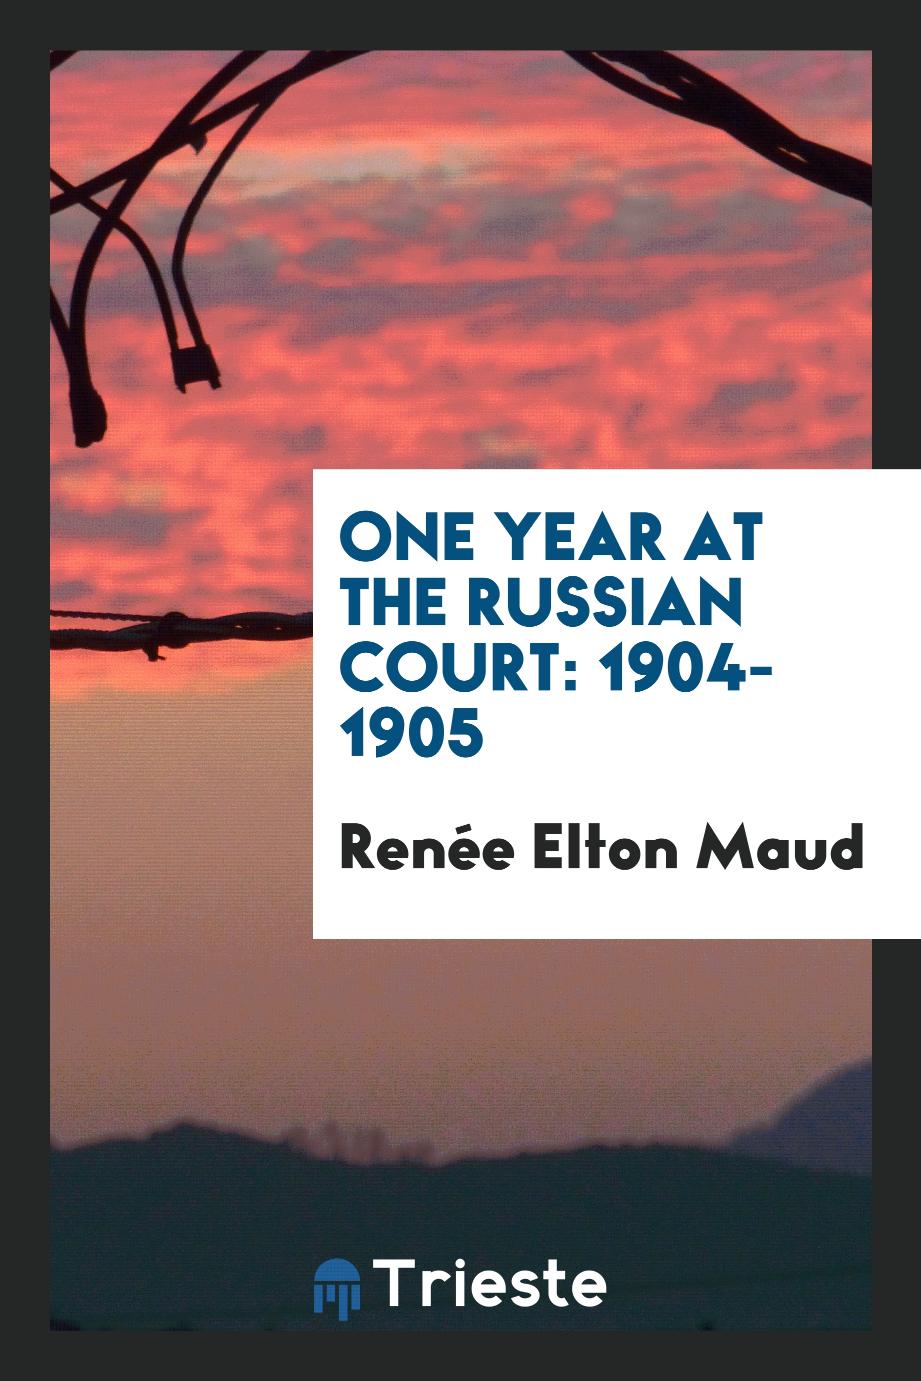 One year at the Russian court: 1904-1905